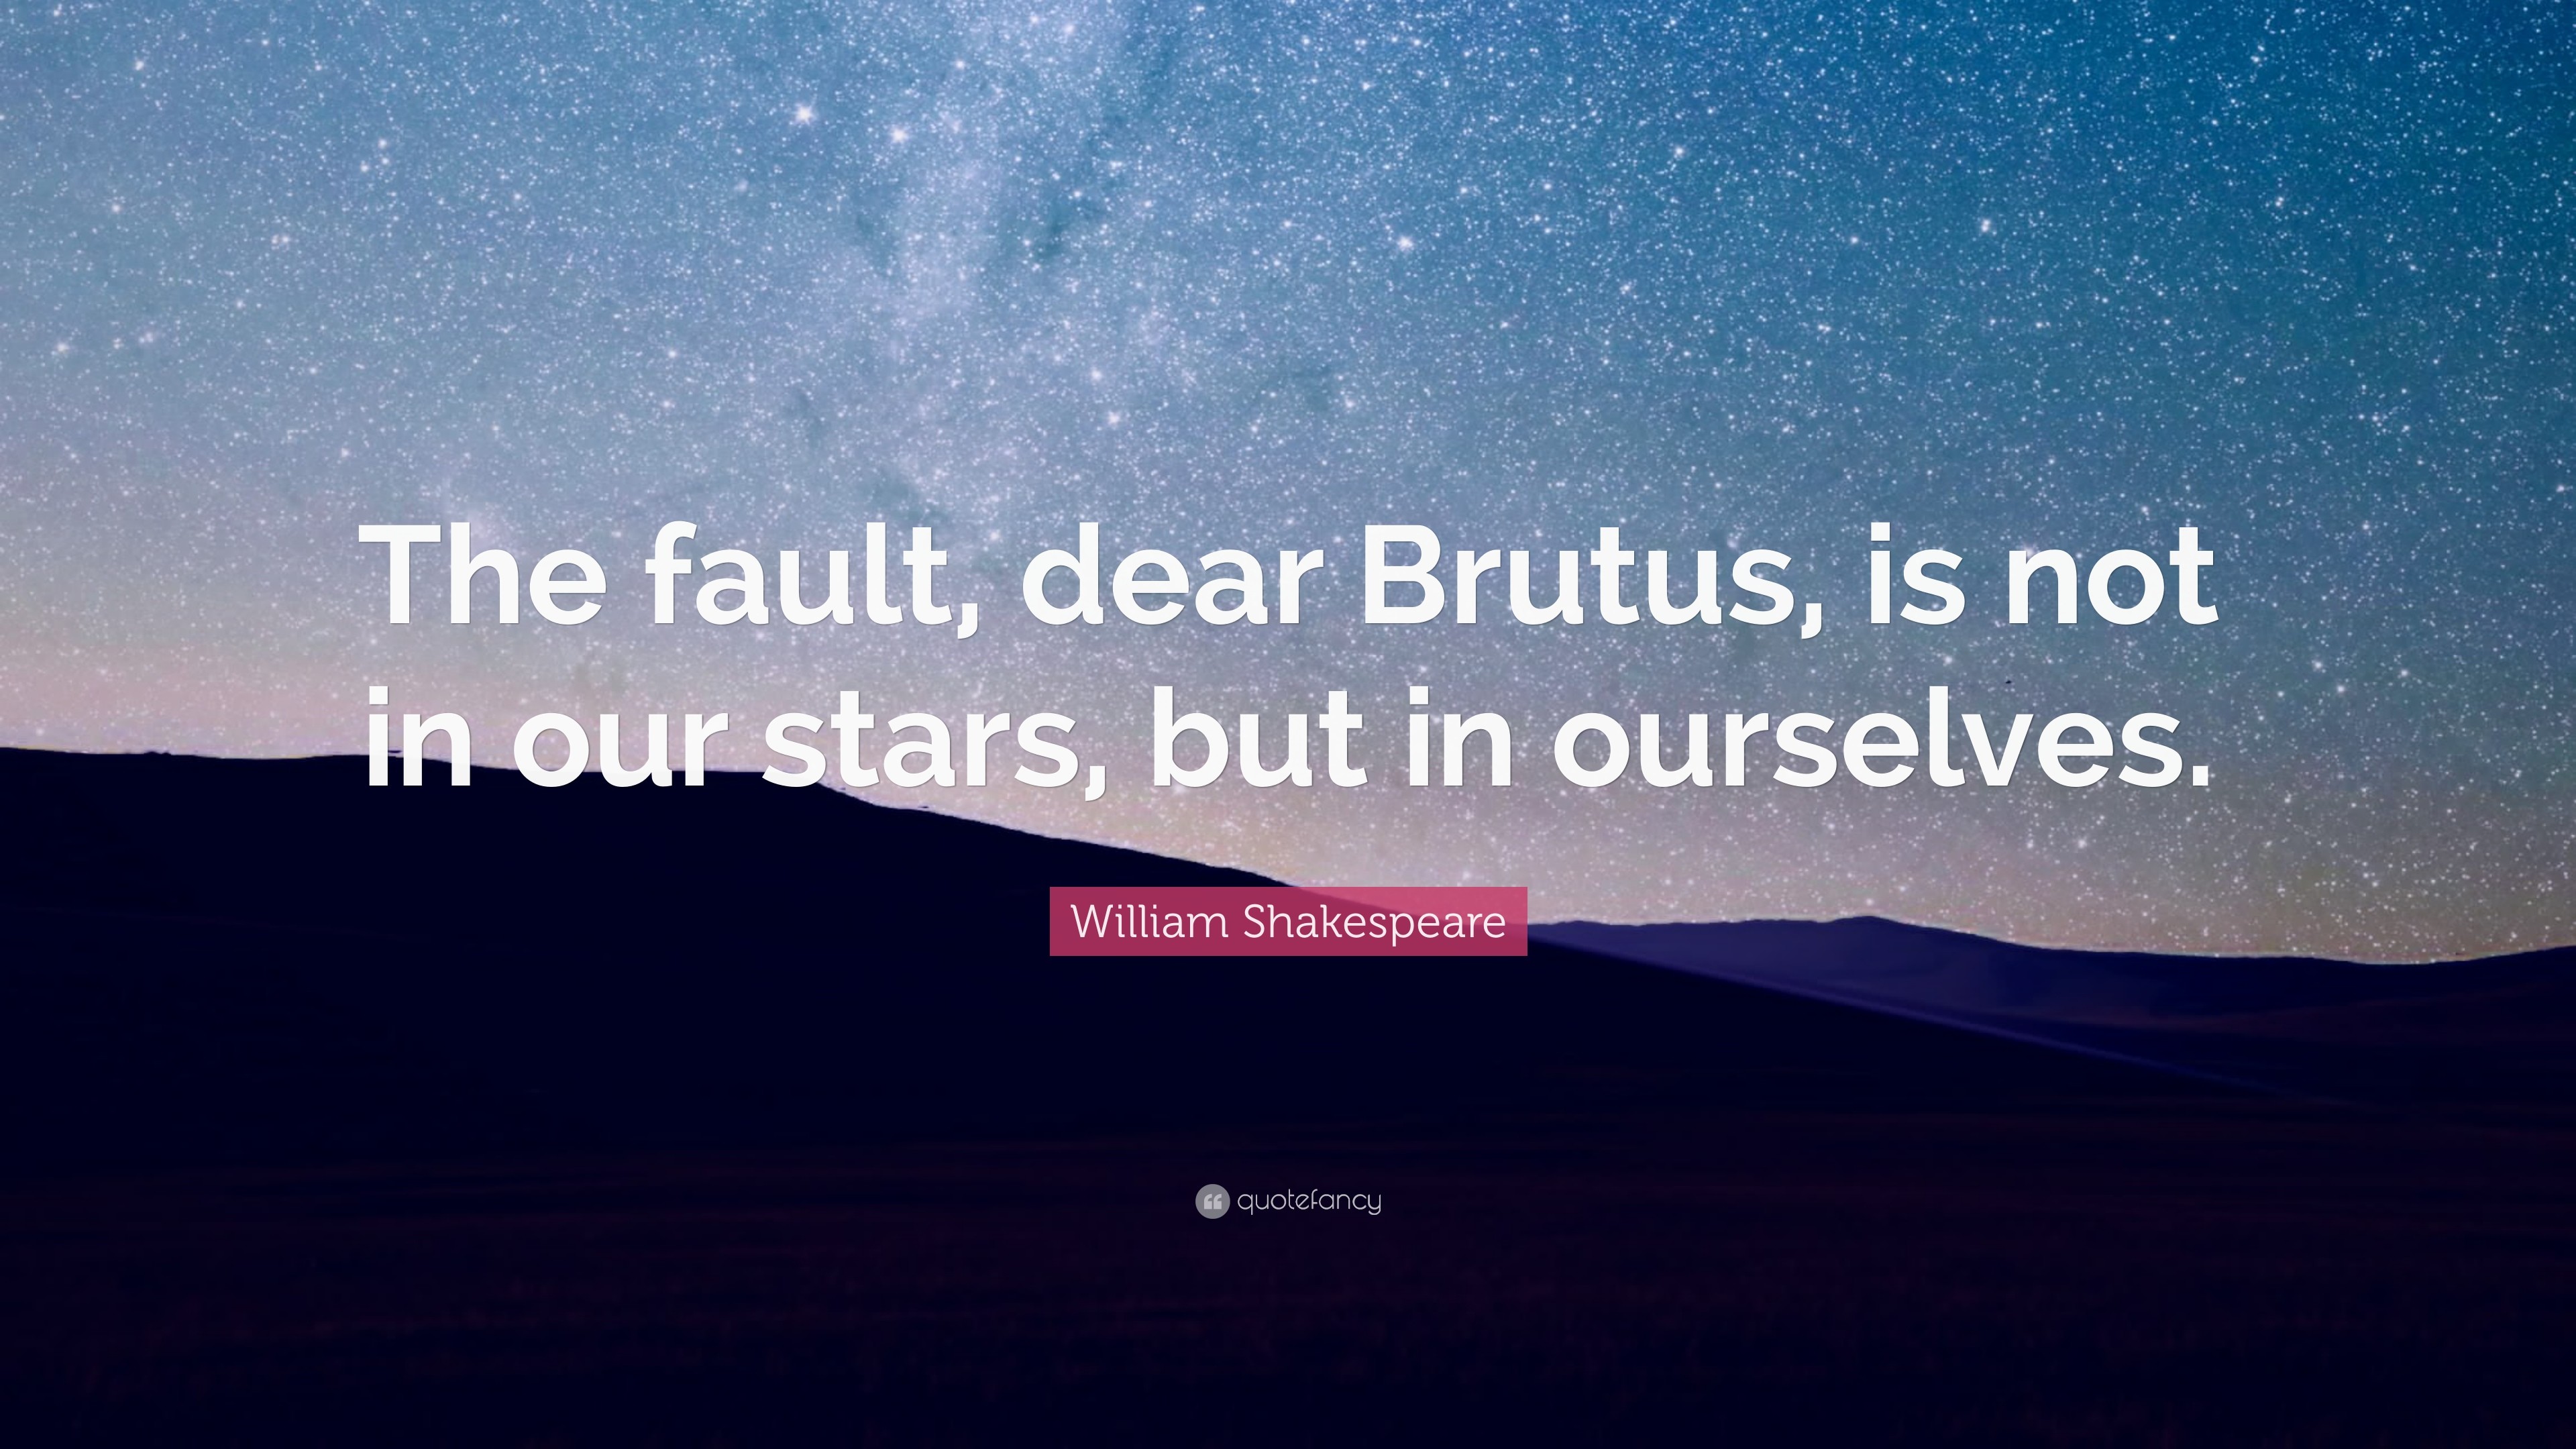 3840x2160 William Shakespeare Quote: “The fault, dear Brutus, is not in our stars